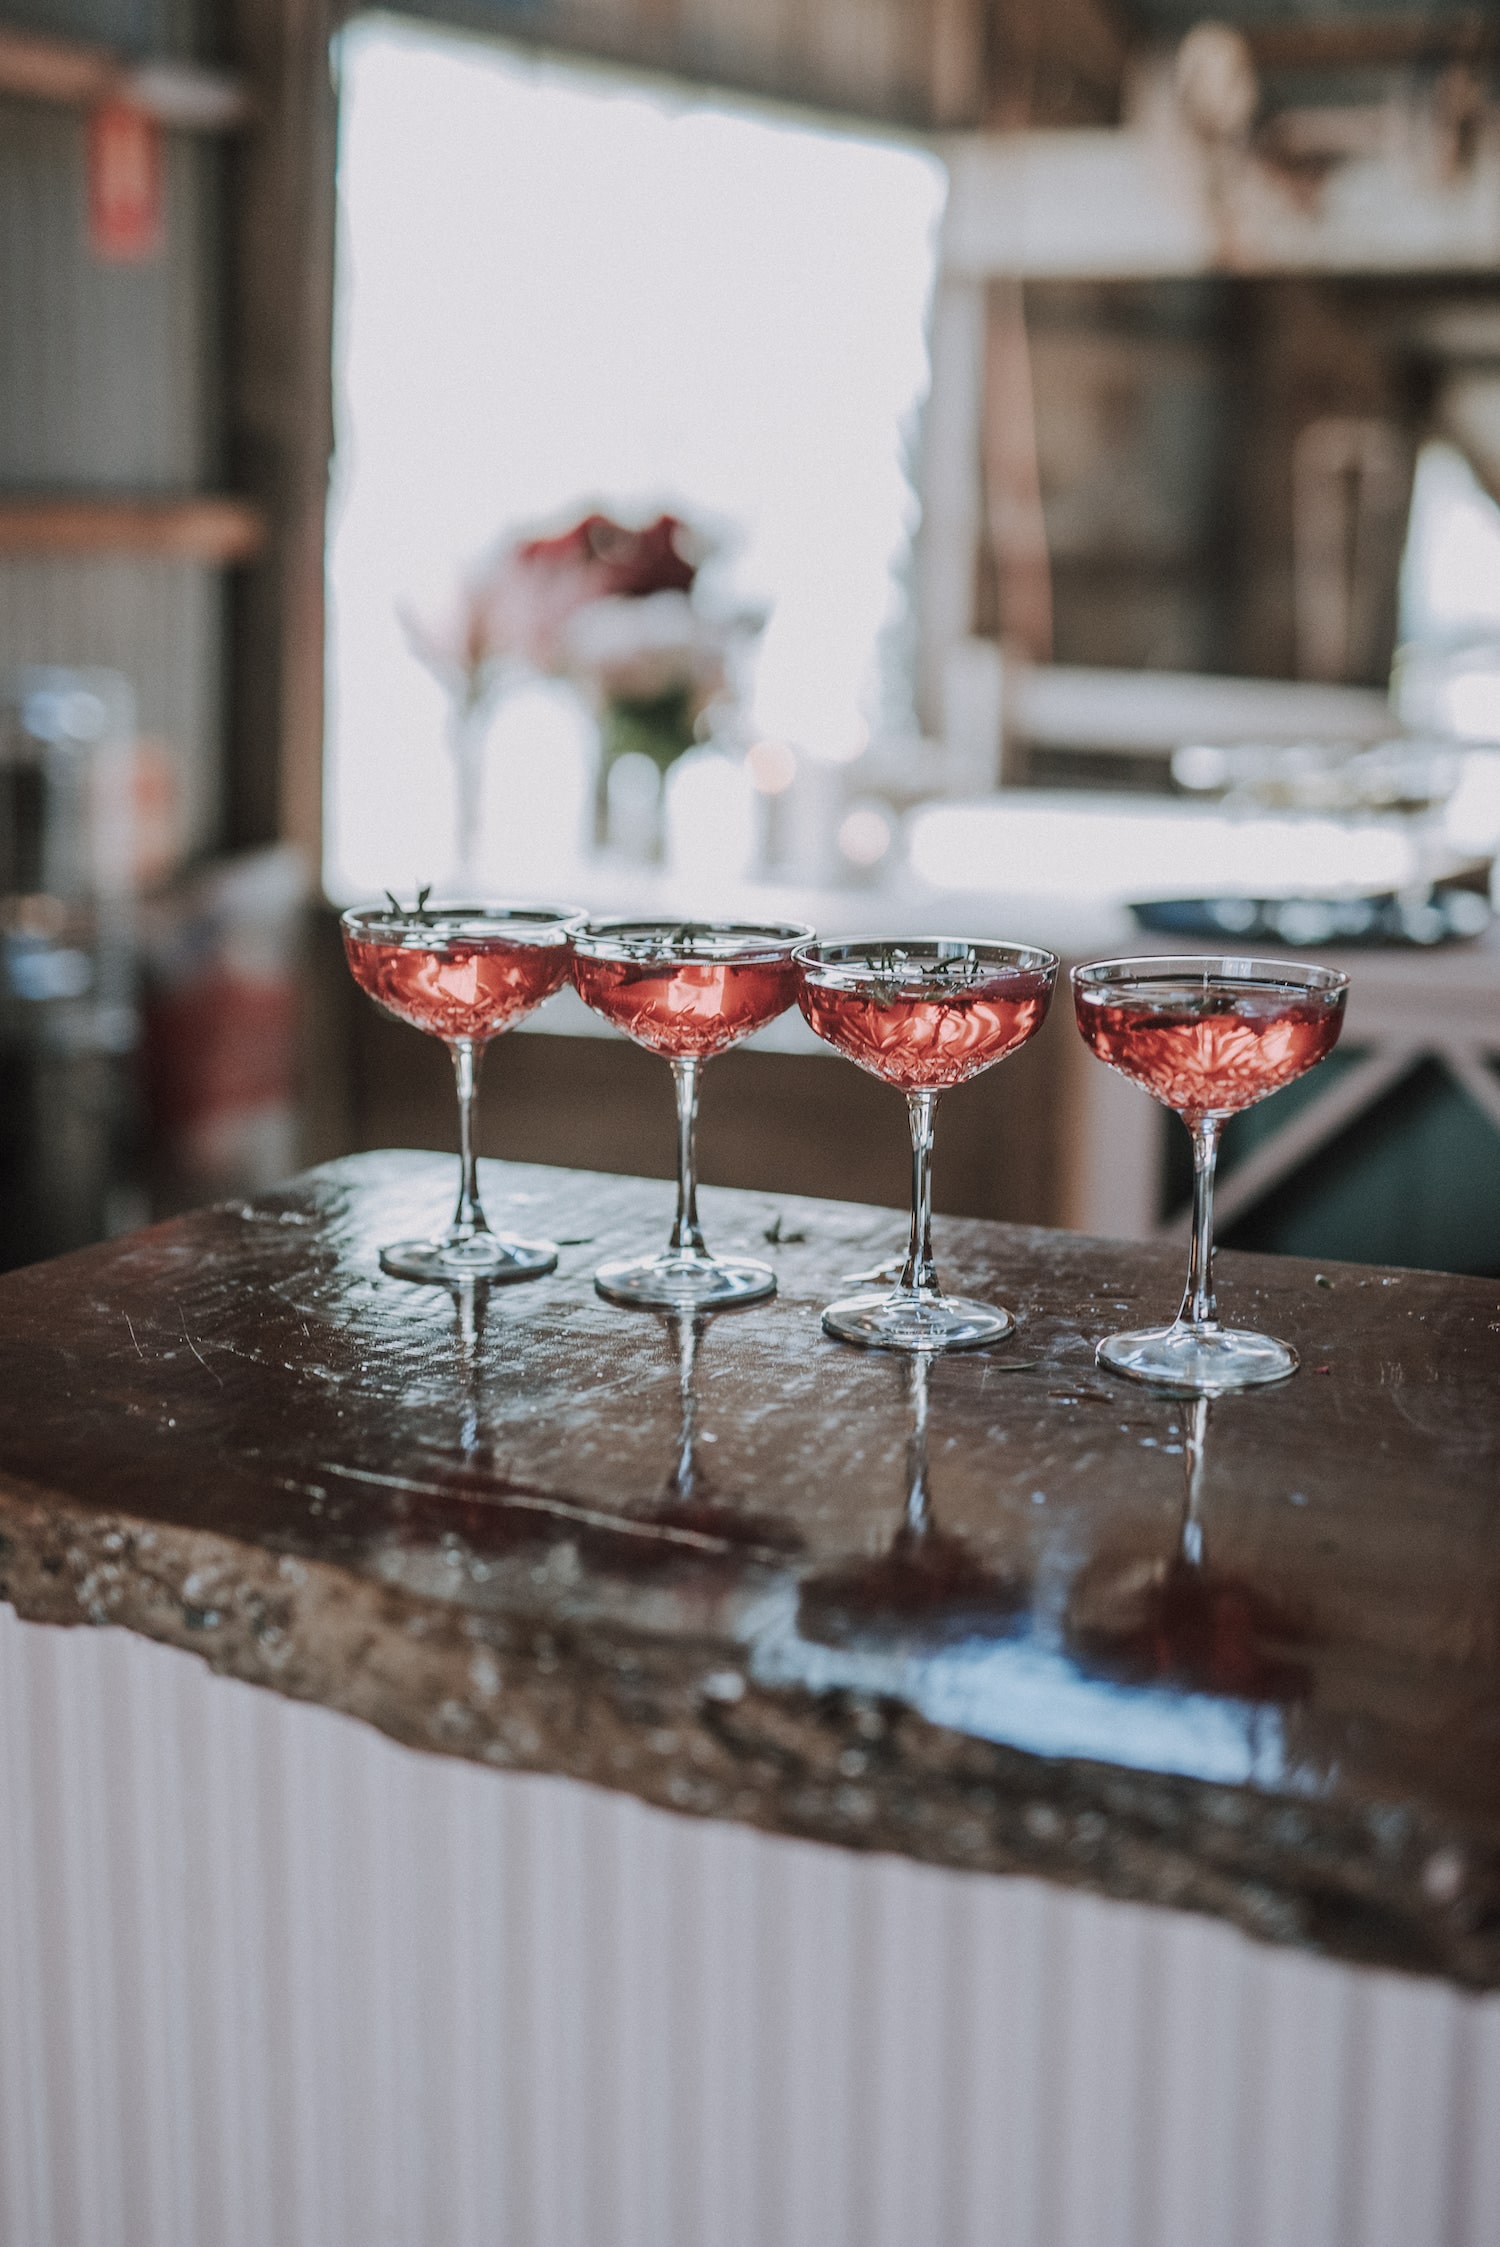 4 pink cocktails lined up on a wooden bar